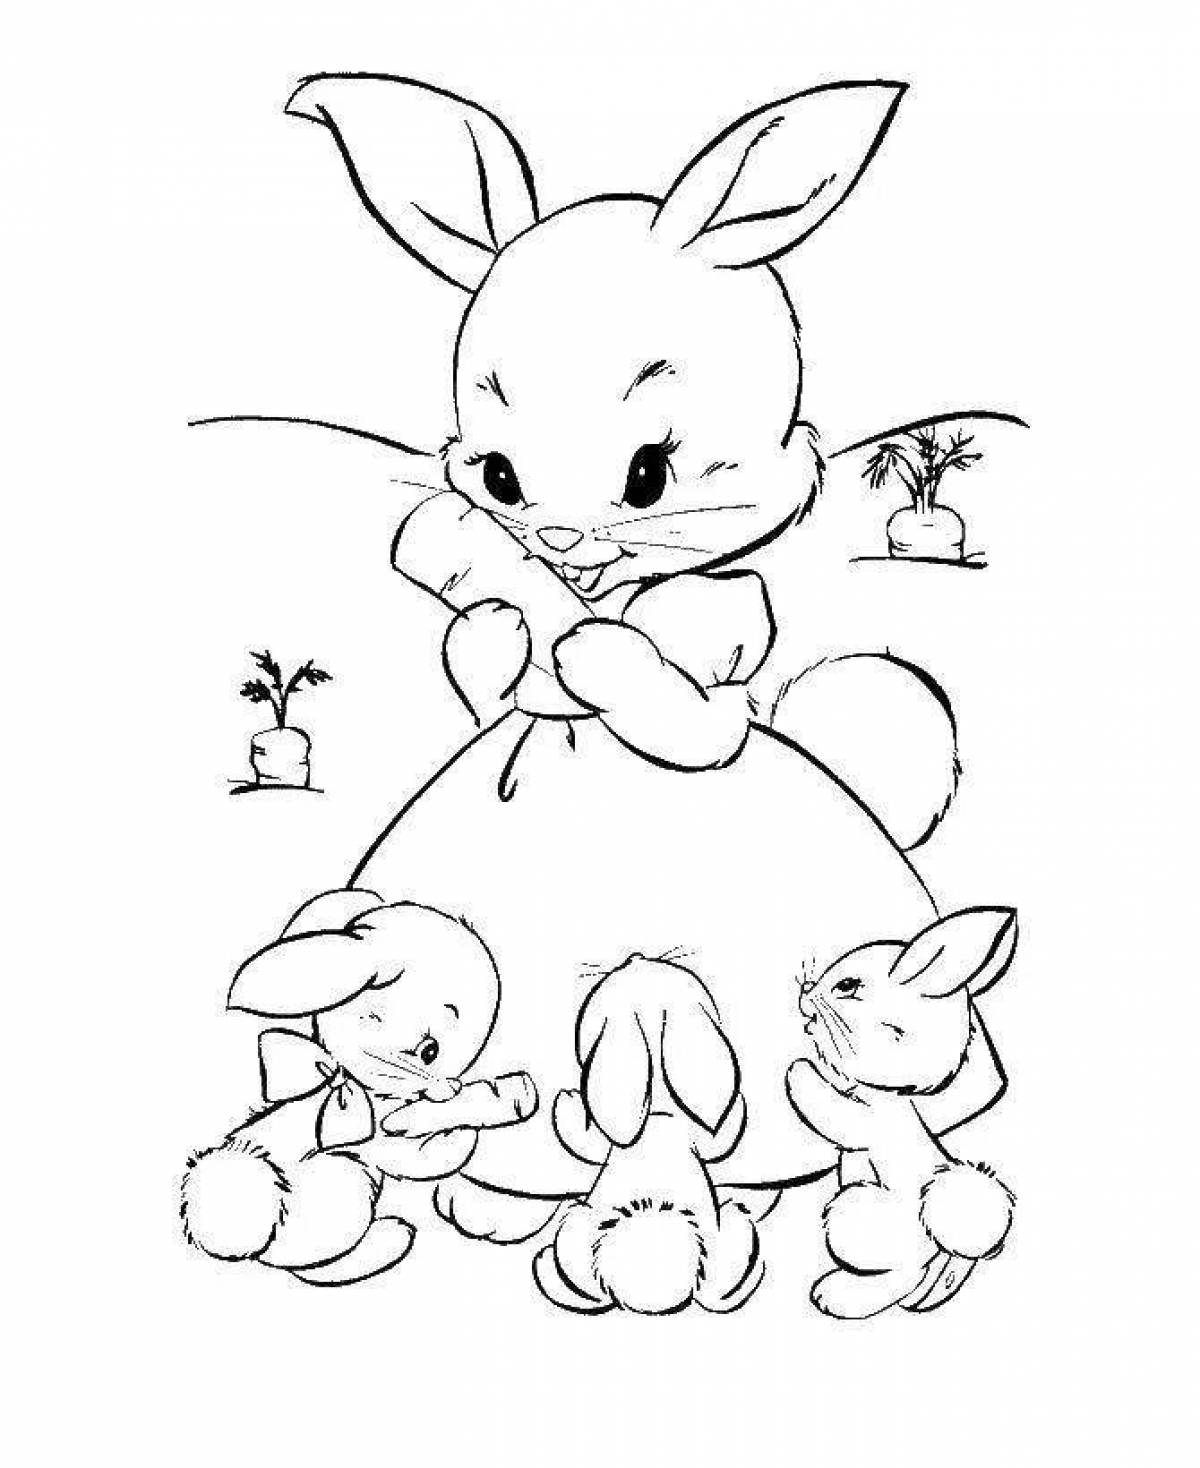 Outstanding Bunny Coloring Page for 6-7 year olds